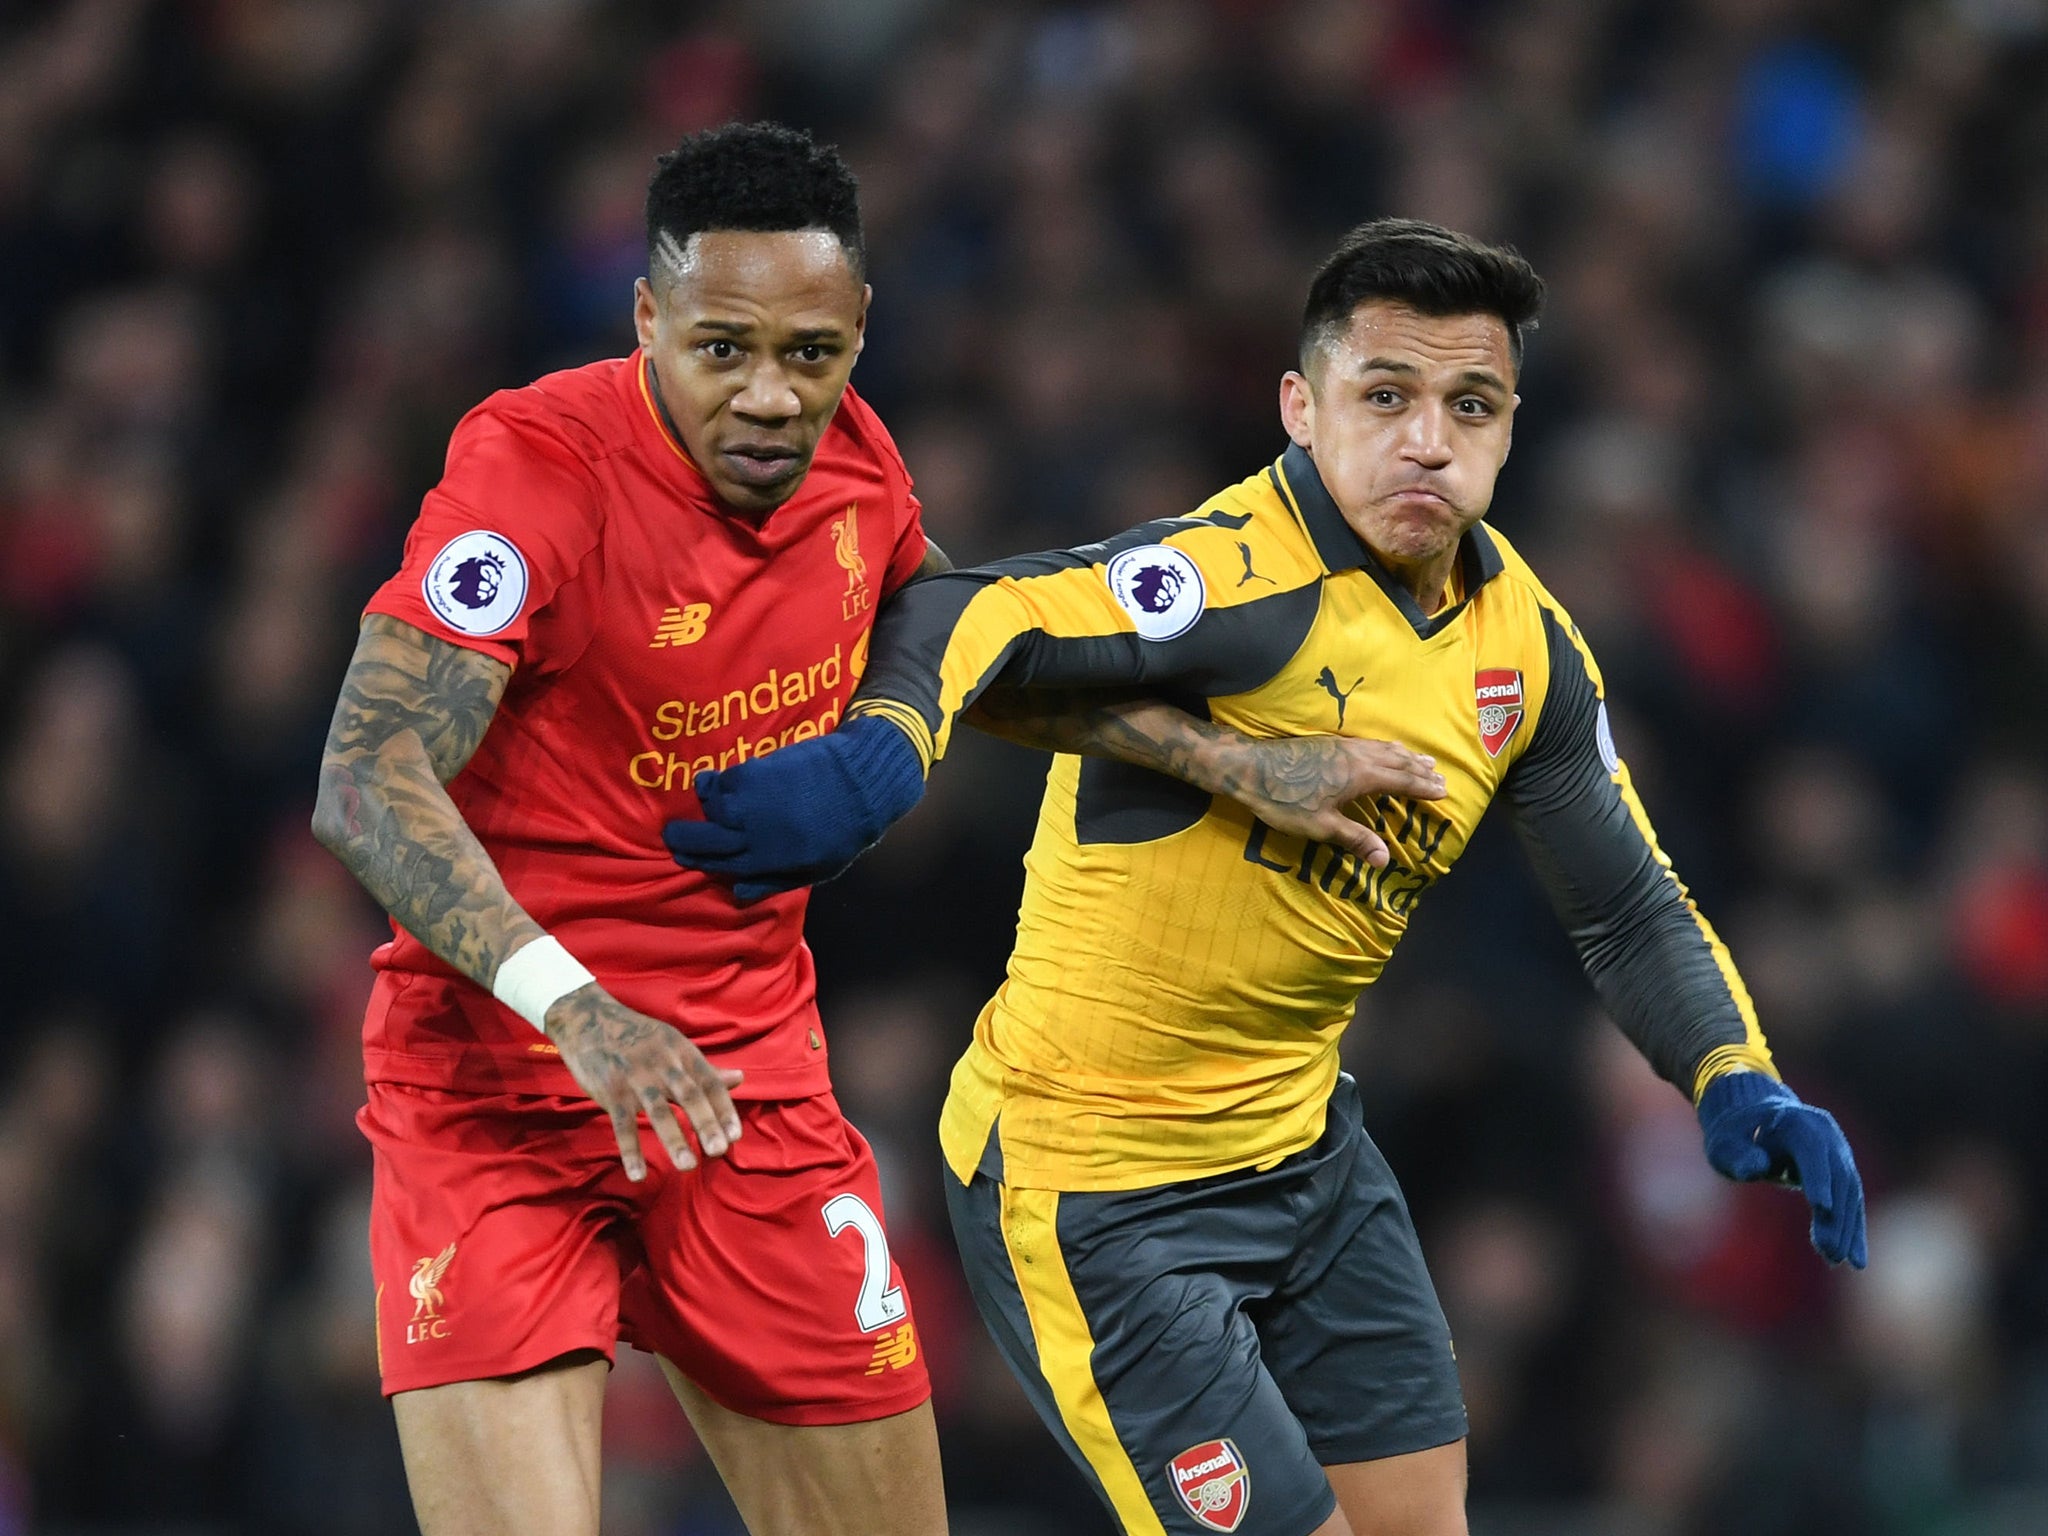 Liverpool and Arsenal could face each other in a playoff, but Manchester City could also be dragged into the mix